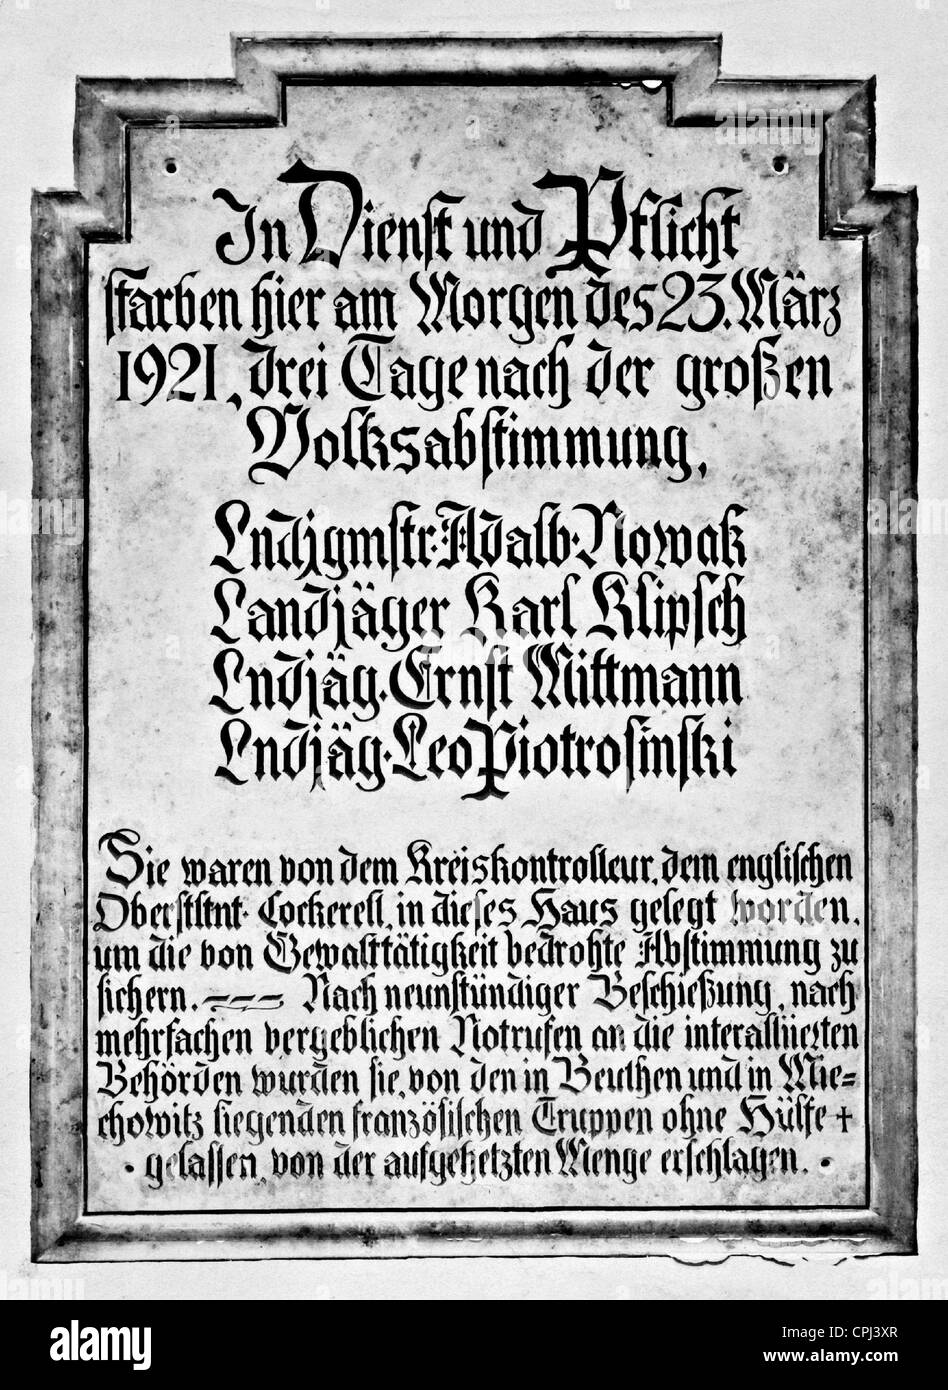 Plaque for the German fallen after the plebiscite in Upper Silesia, 1921 Stock Photo